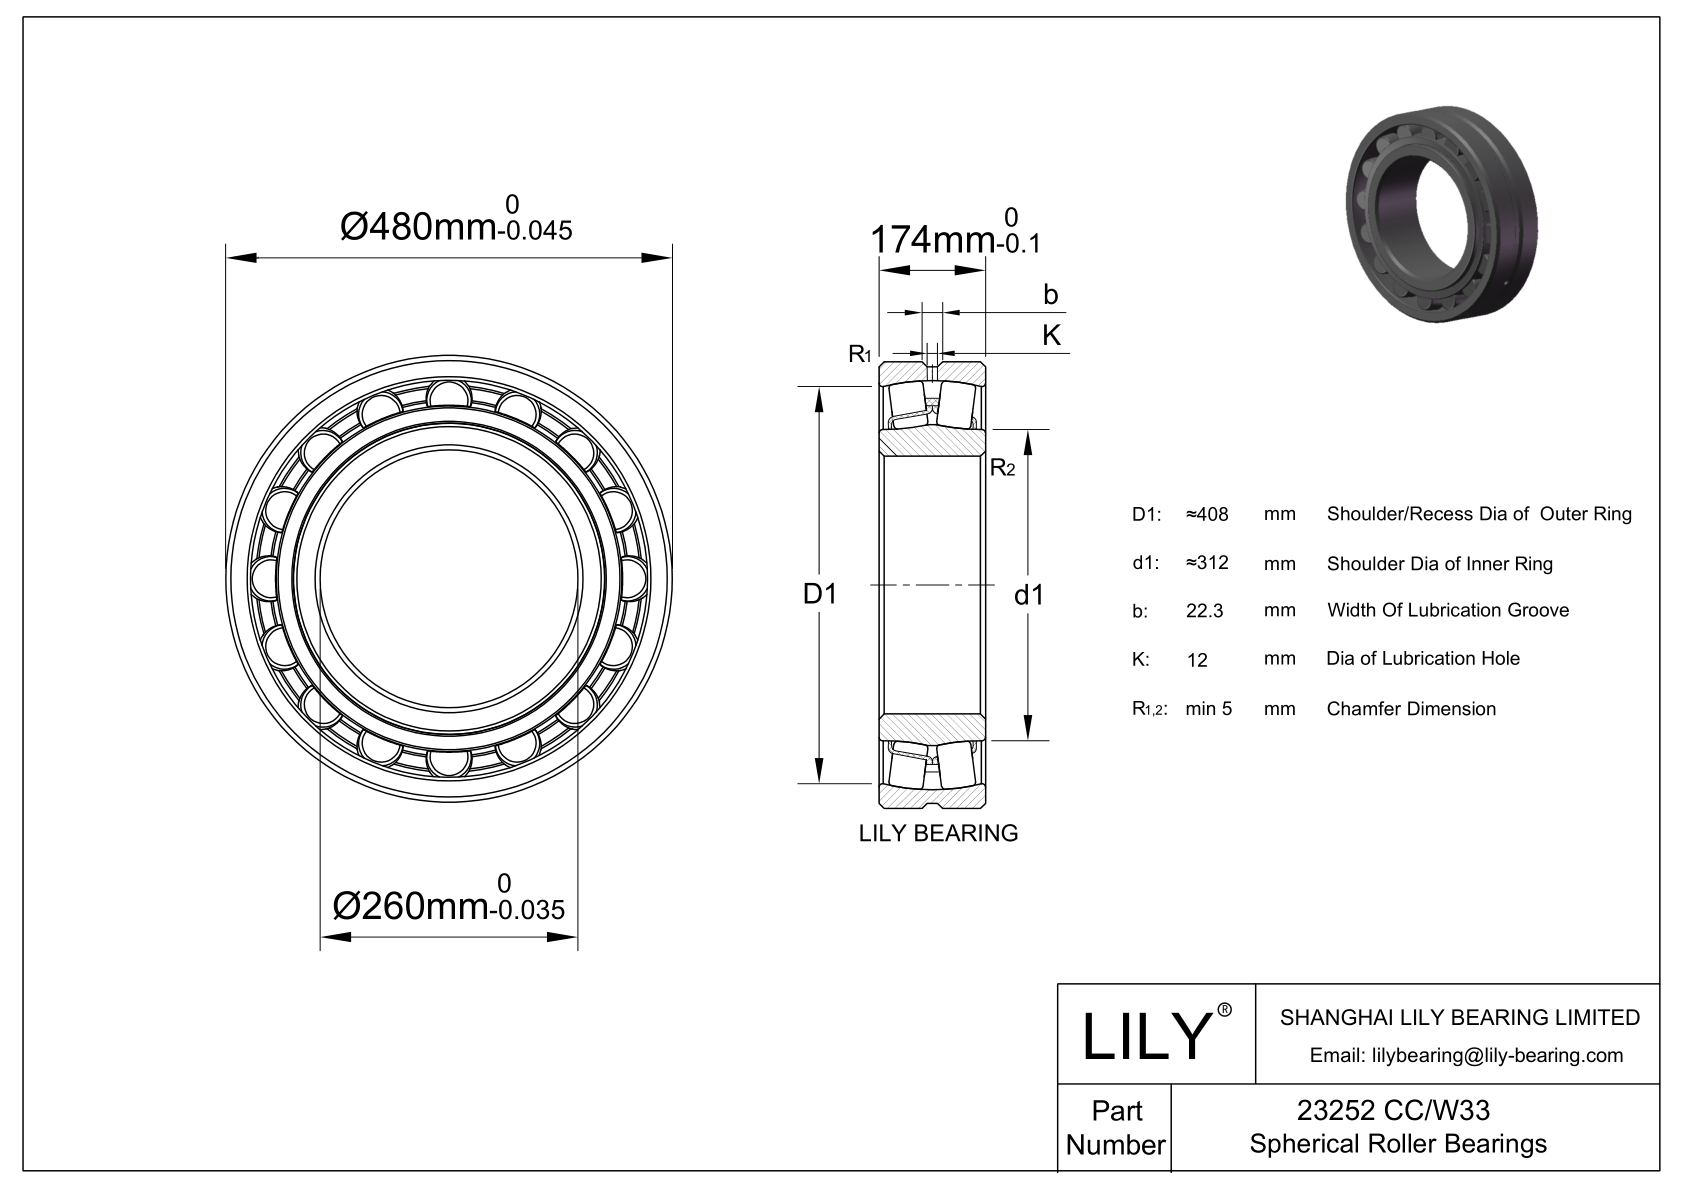 23252 CC/W33 Double Row Spherical Roller Bearing cad drawing